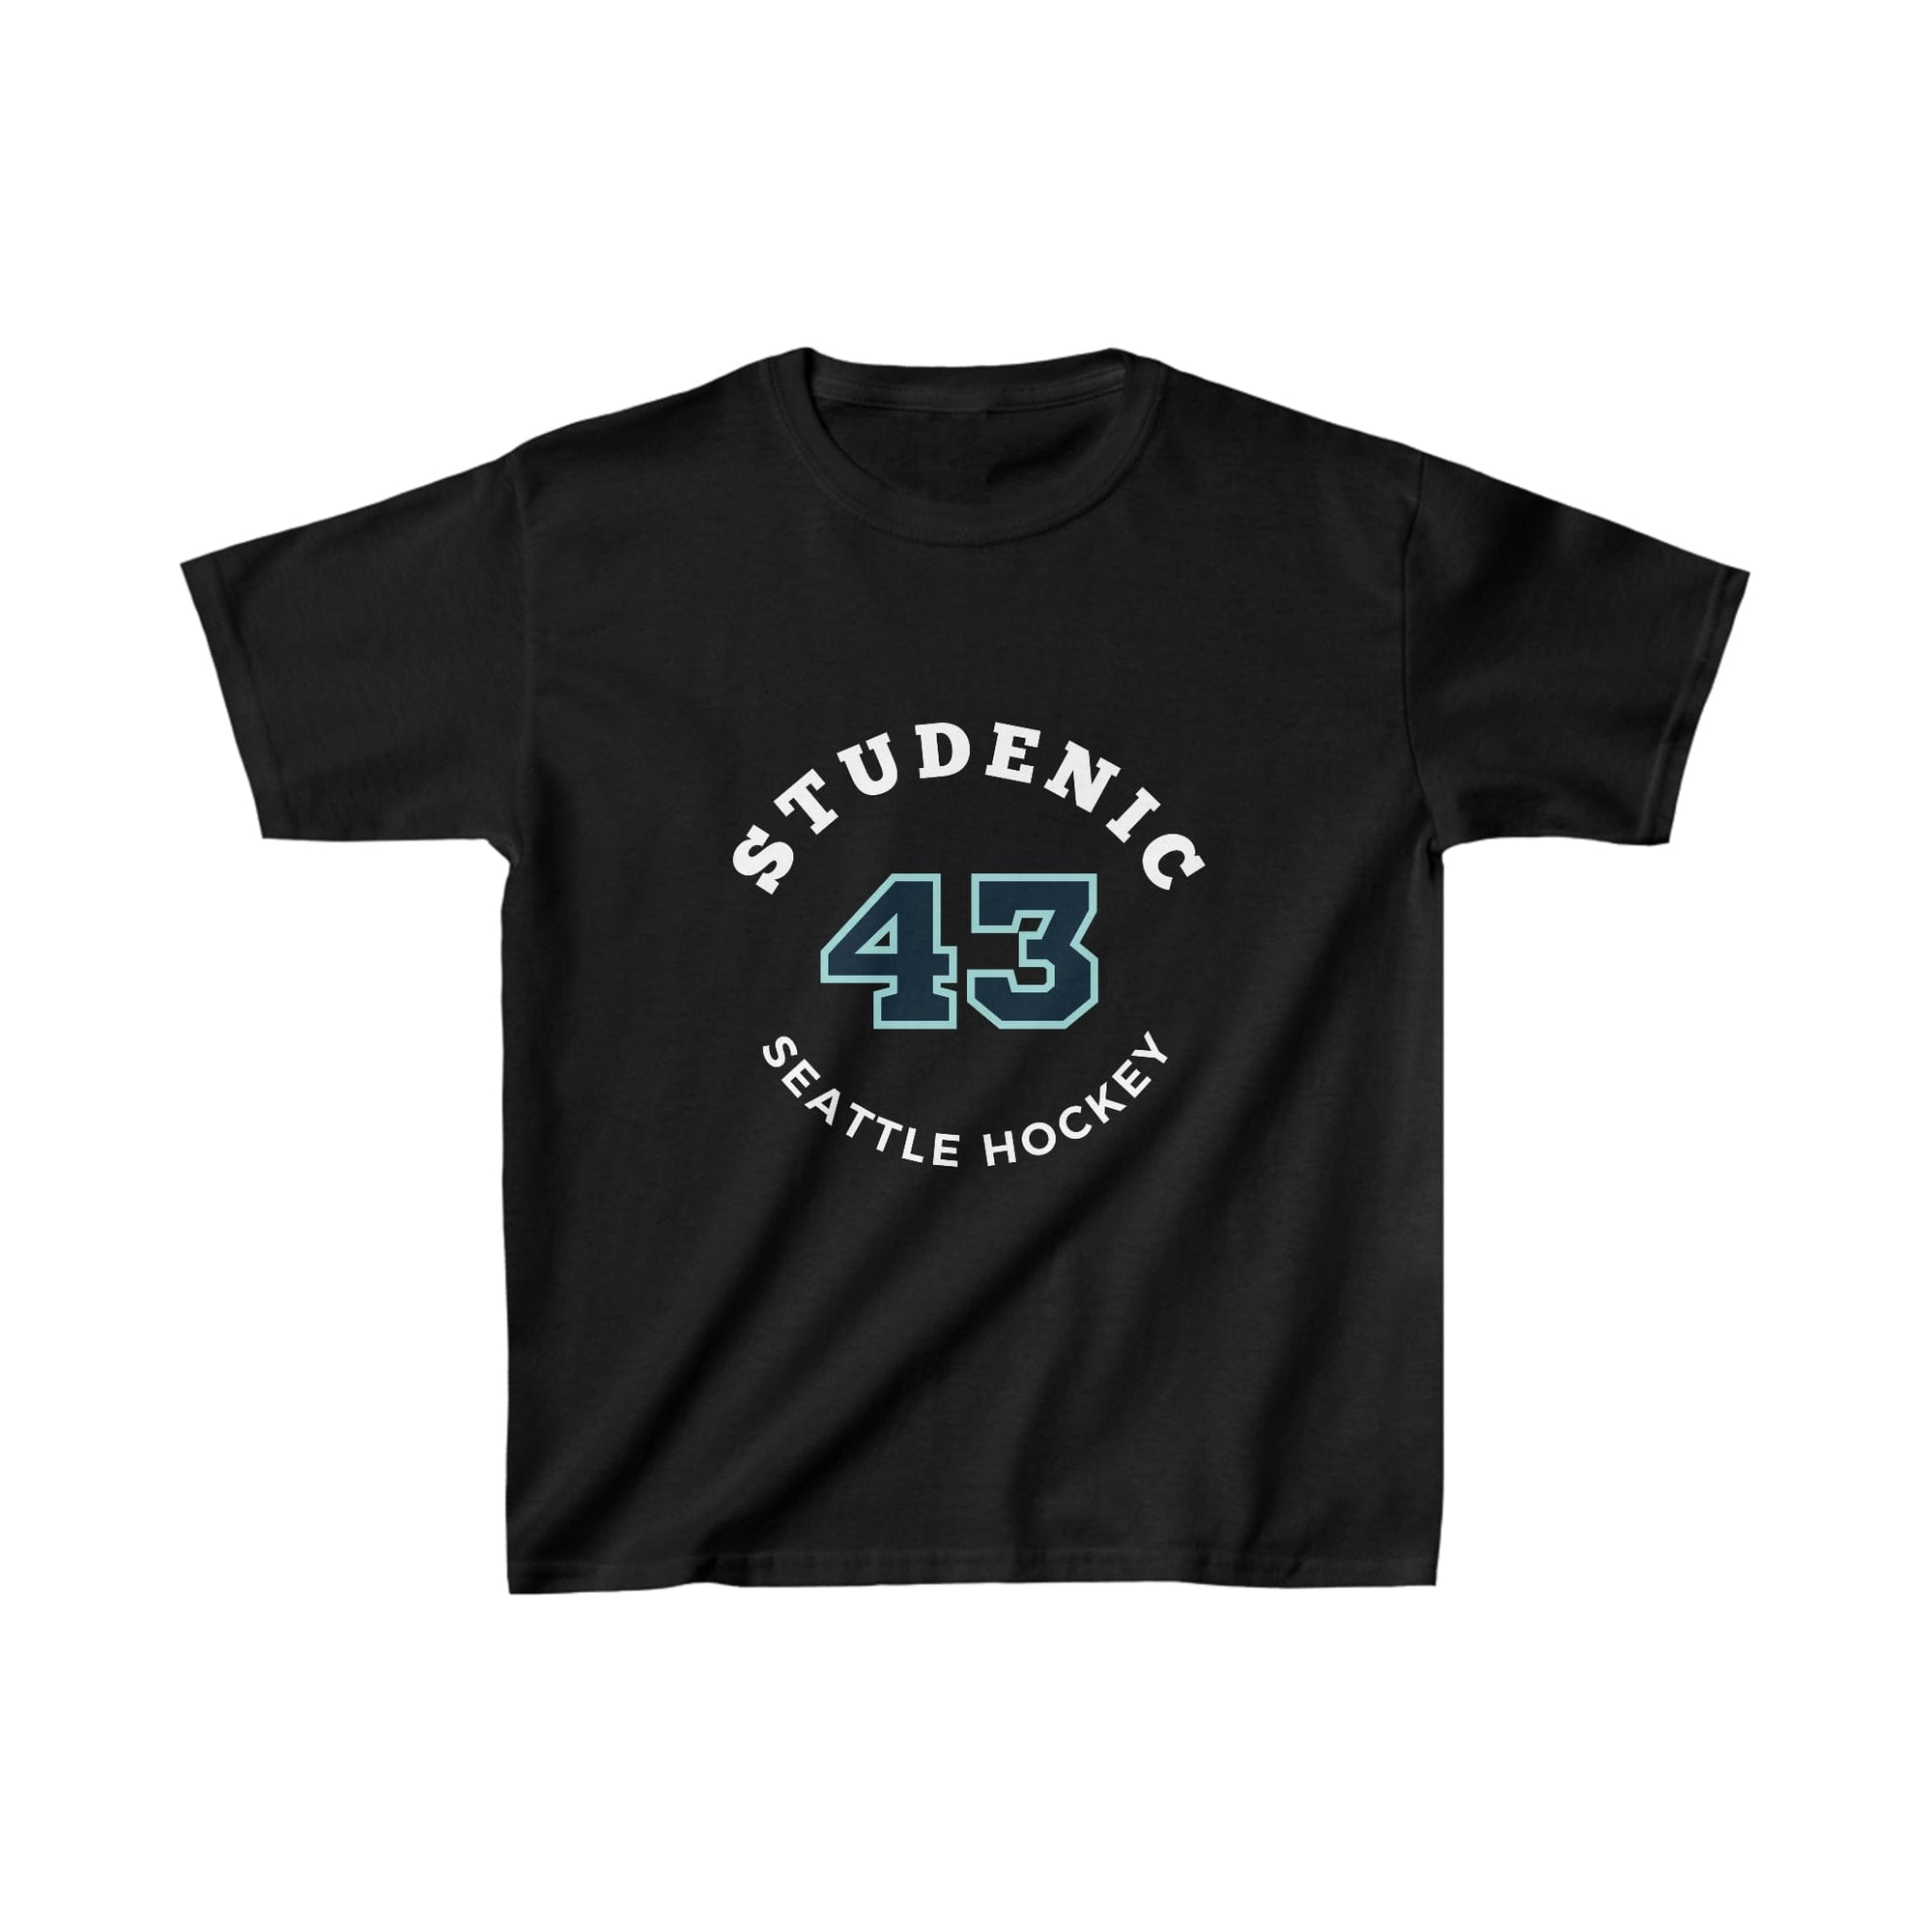 Kids clothes Studenic 43 Seattle Hockey Number Arch Design Kids Tee